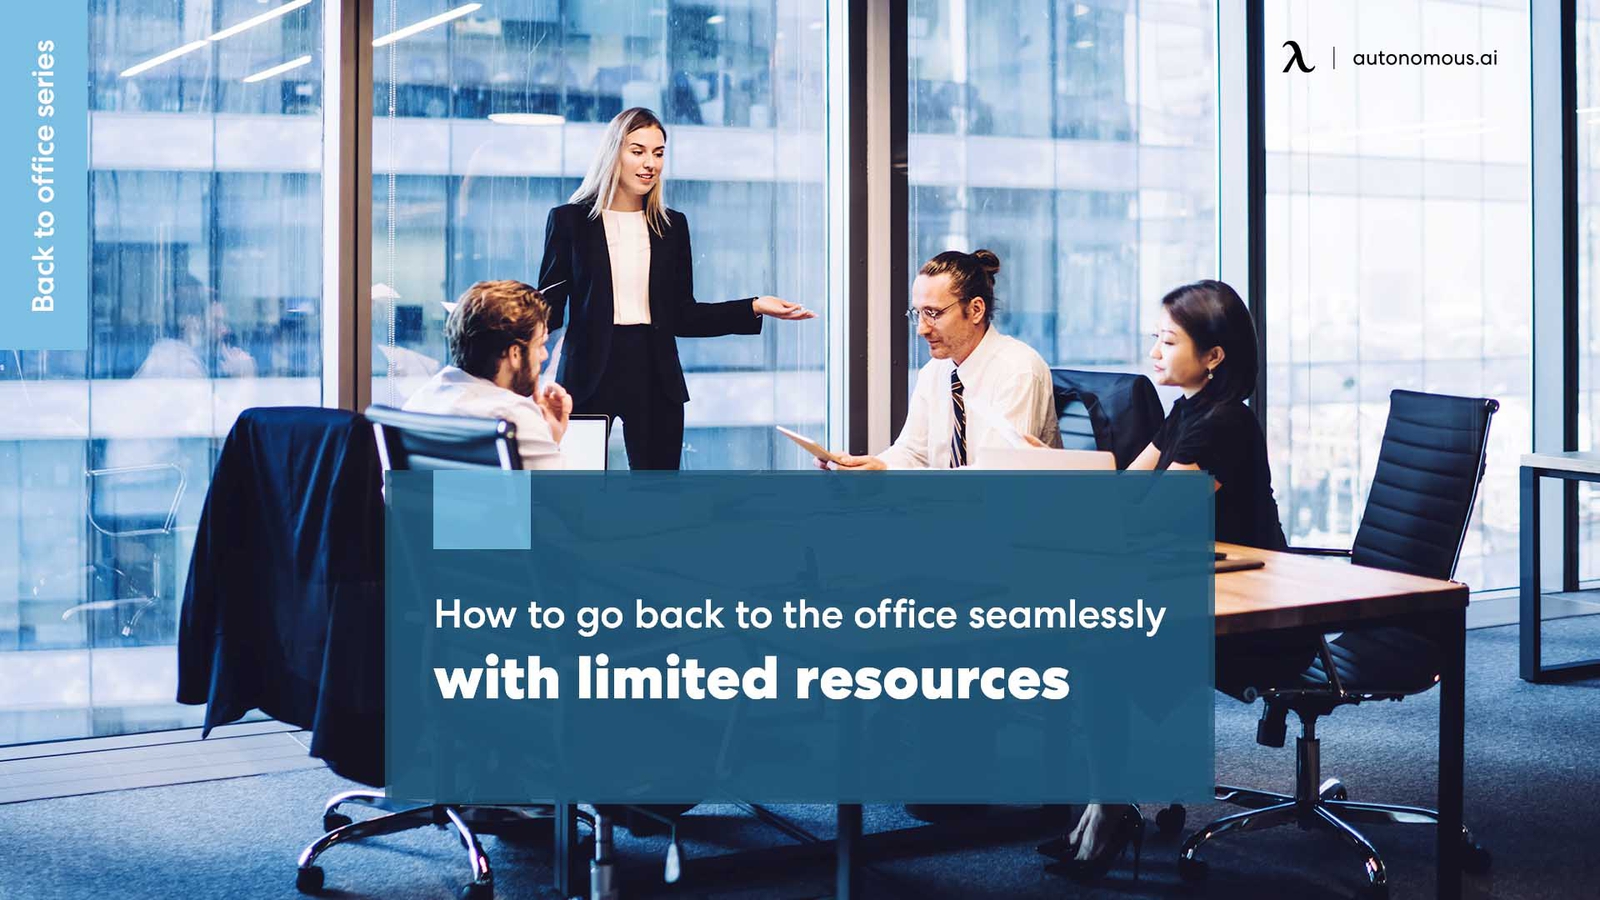 How to go back to the office seamlessly with limited resources